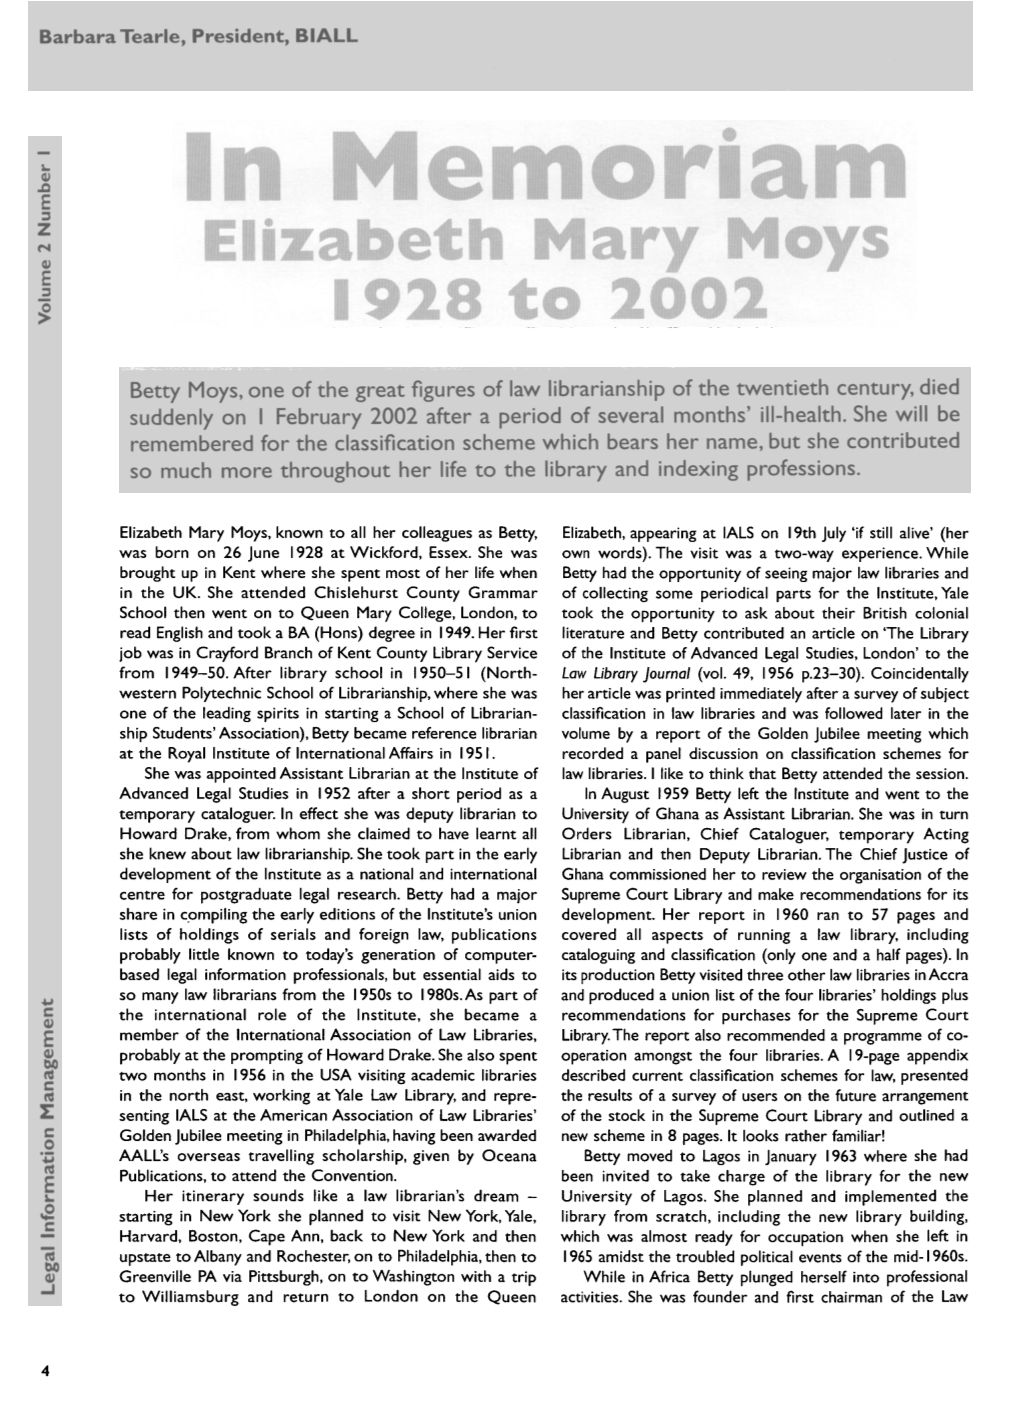 Betty Moys, One of the Great Figures of Law Librarianship of the Twentieth Century, Died Suddenly on I February 2002 After a Period of Several Months' Ill-Health